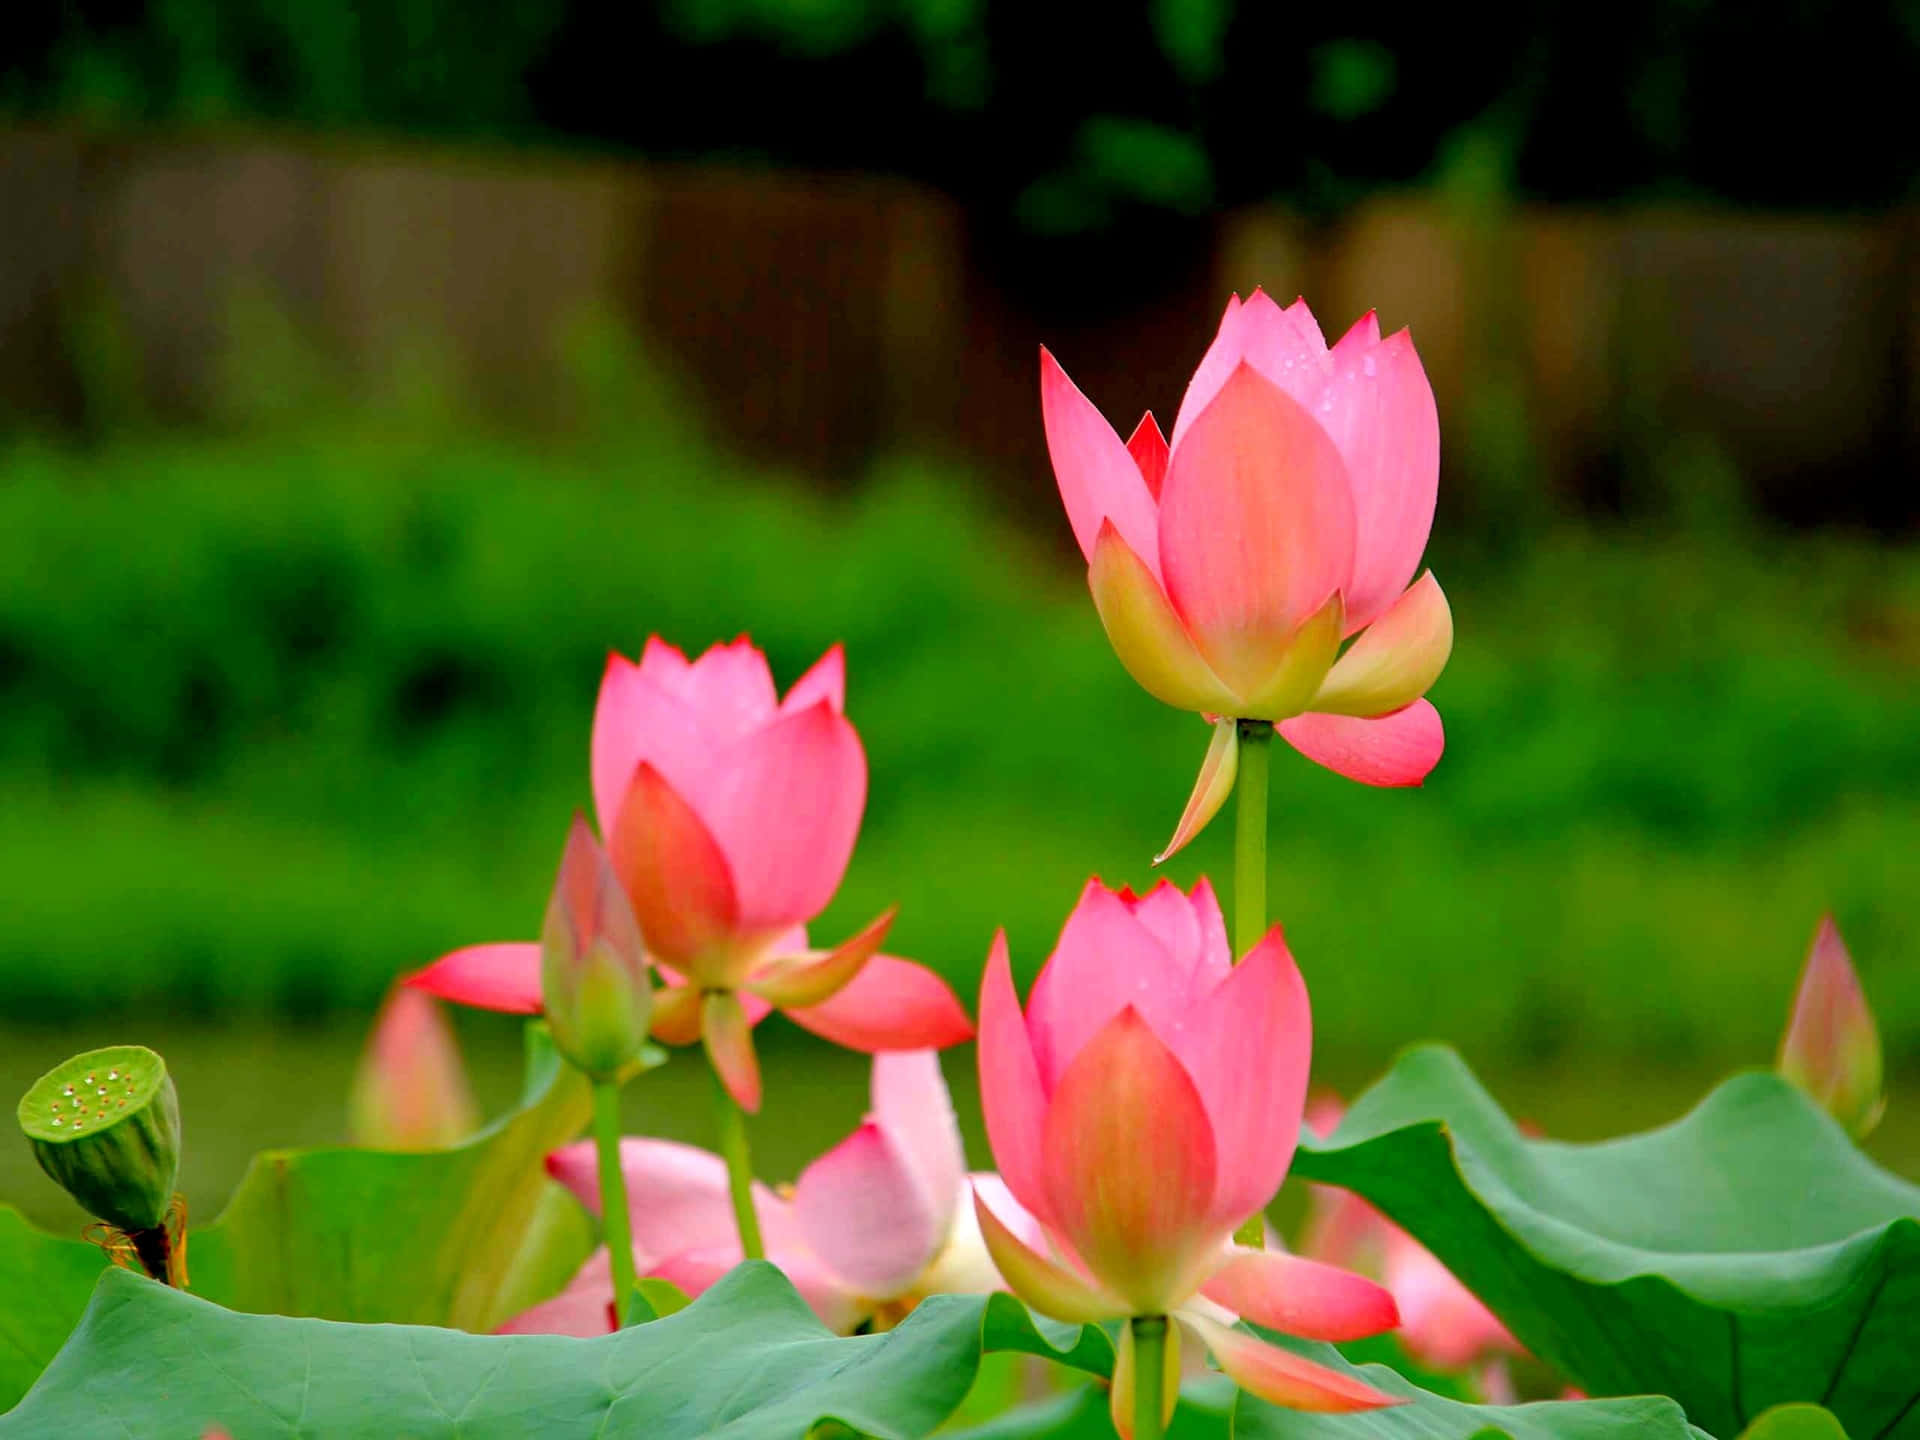 A gorgeous pink Lotus Flower in full bloom.